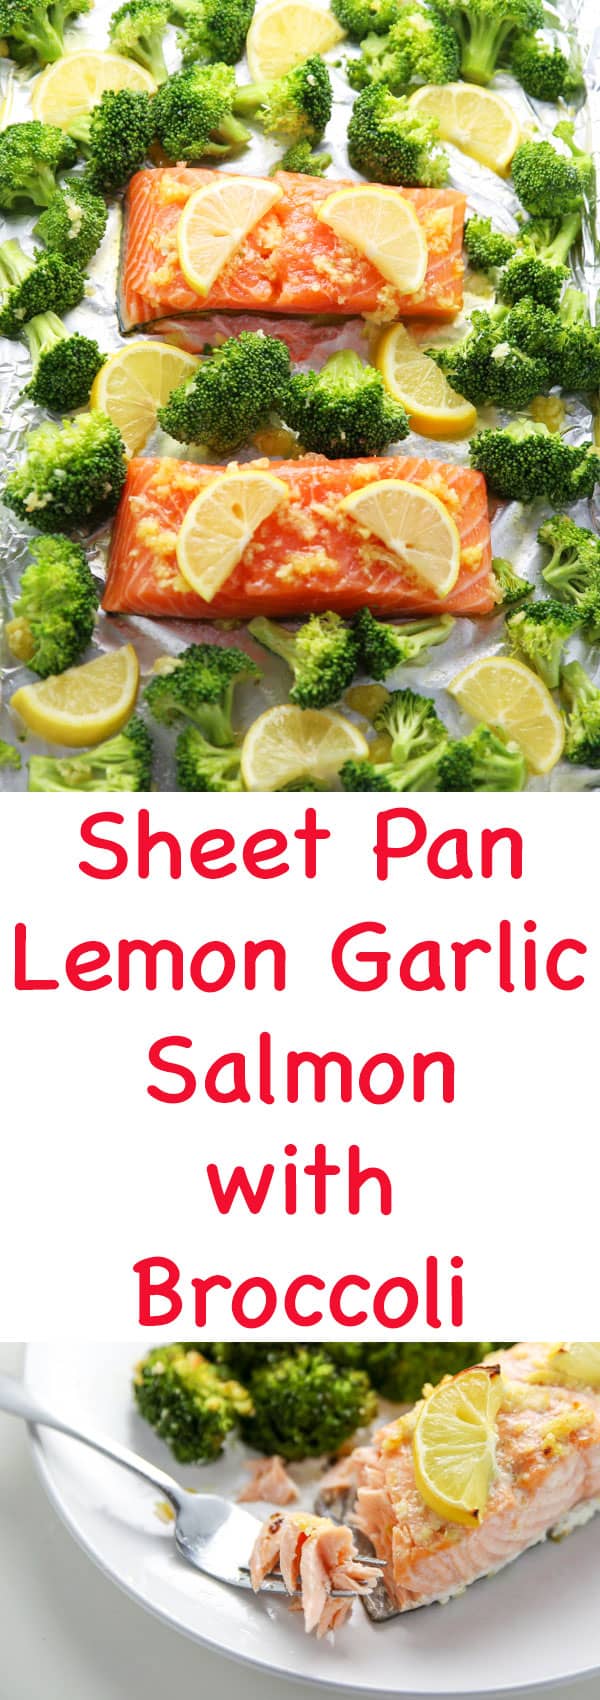 This Sheet Pan Lemon Garlic Salmon With Broccoli can be made in under 20 minutes! The Salmon is so tender, flaky, and delicious!